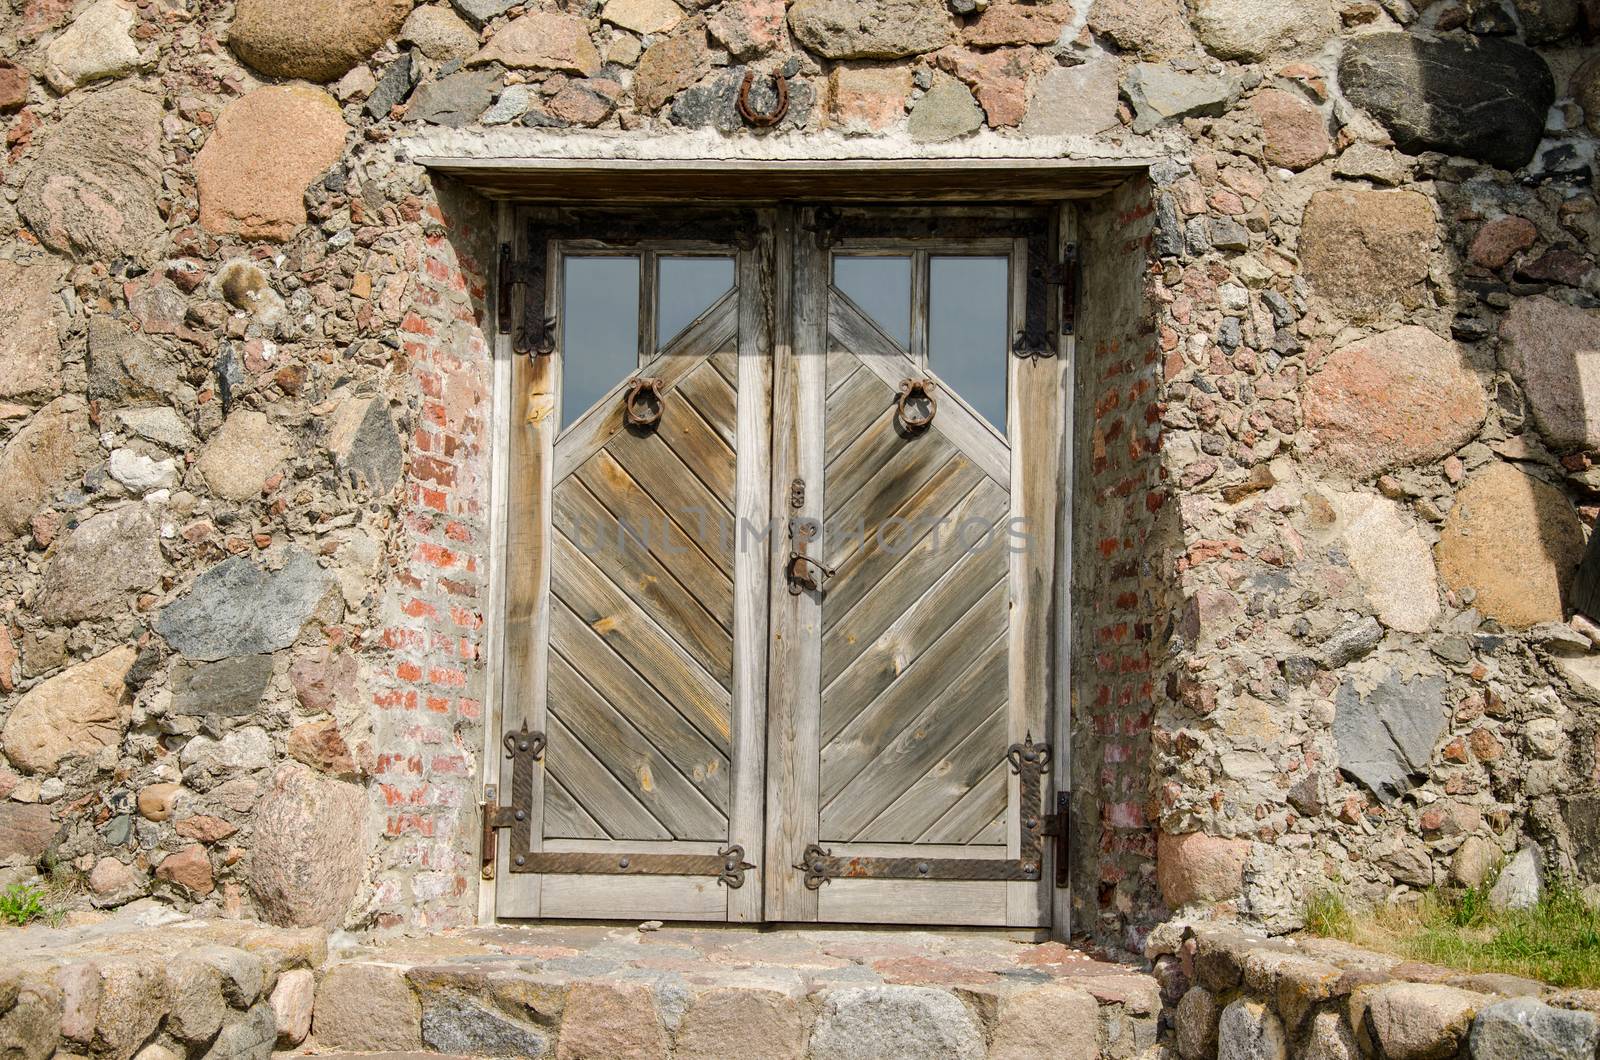 horseshoe hanging over stone wall building old wooden entrance door